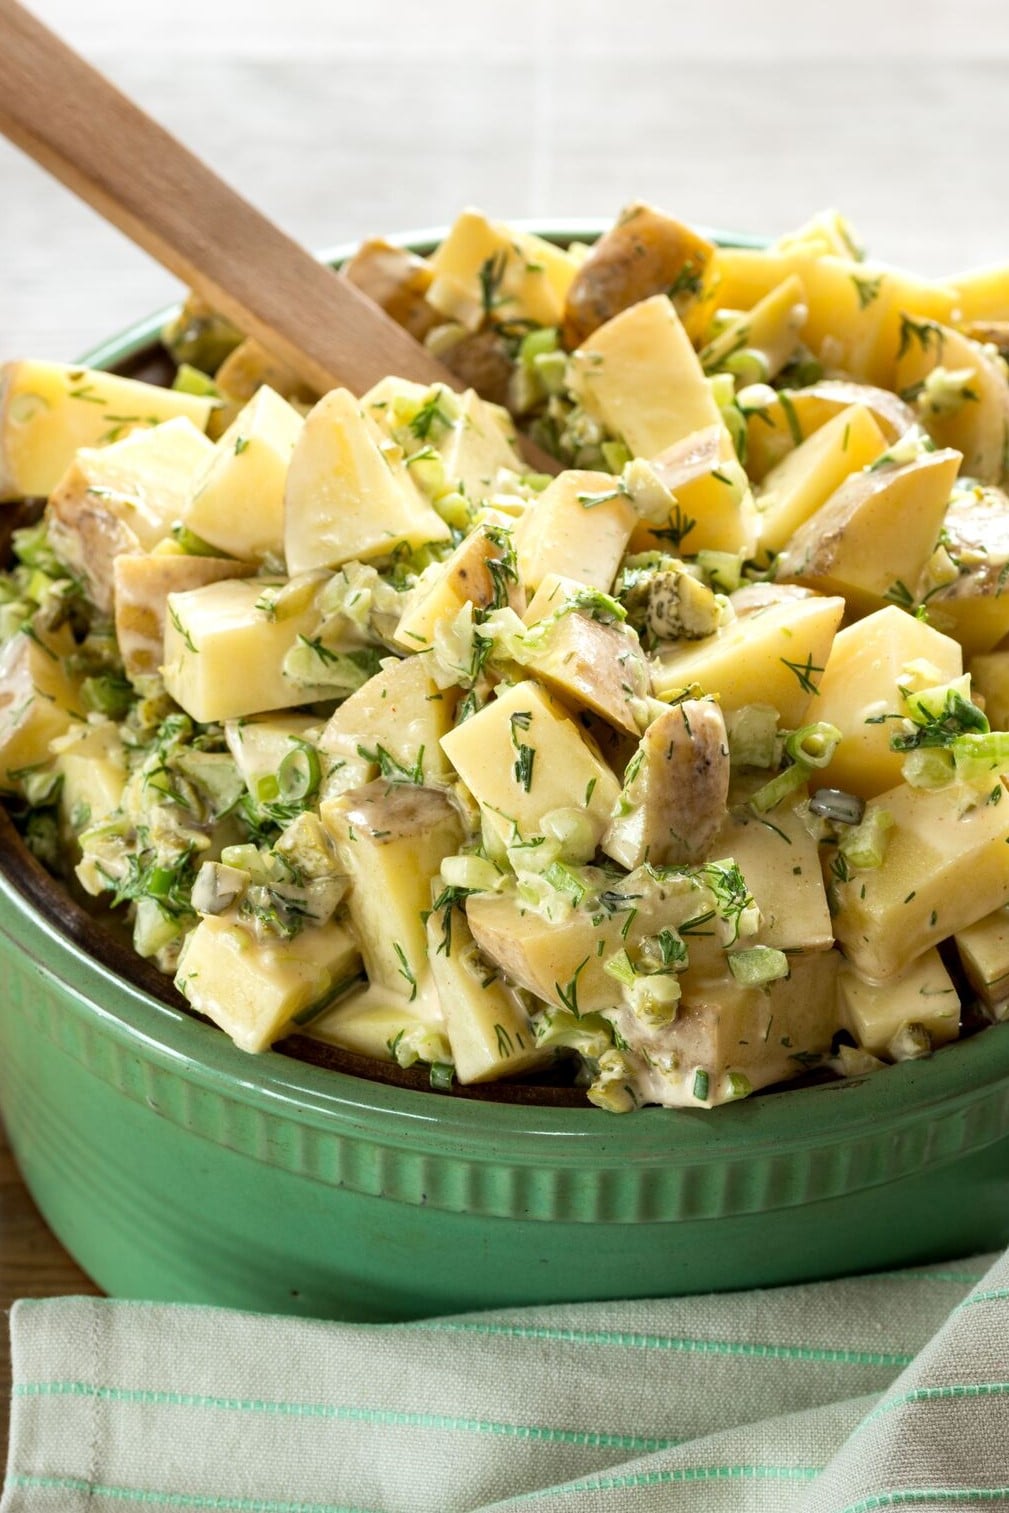 A close up of vegan potato salad in a green bowl with a wooden spoon sticking out of it